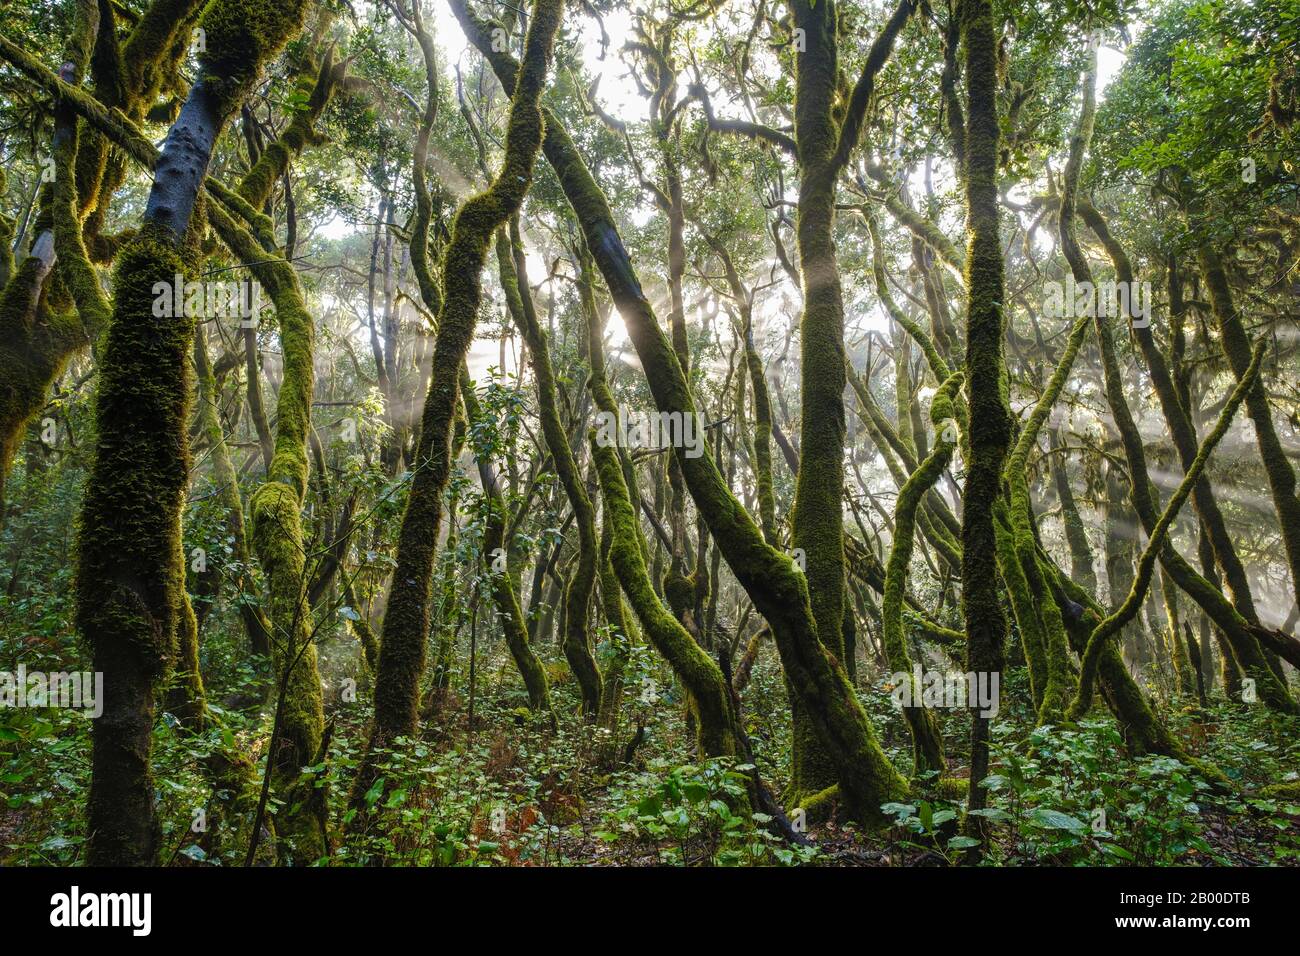 Moss-covered trees in cloud forest, Garajonay National Park, La Gomera, Canary Islands, Spain Stock Photo